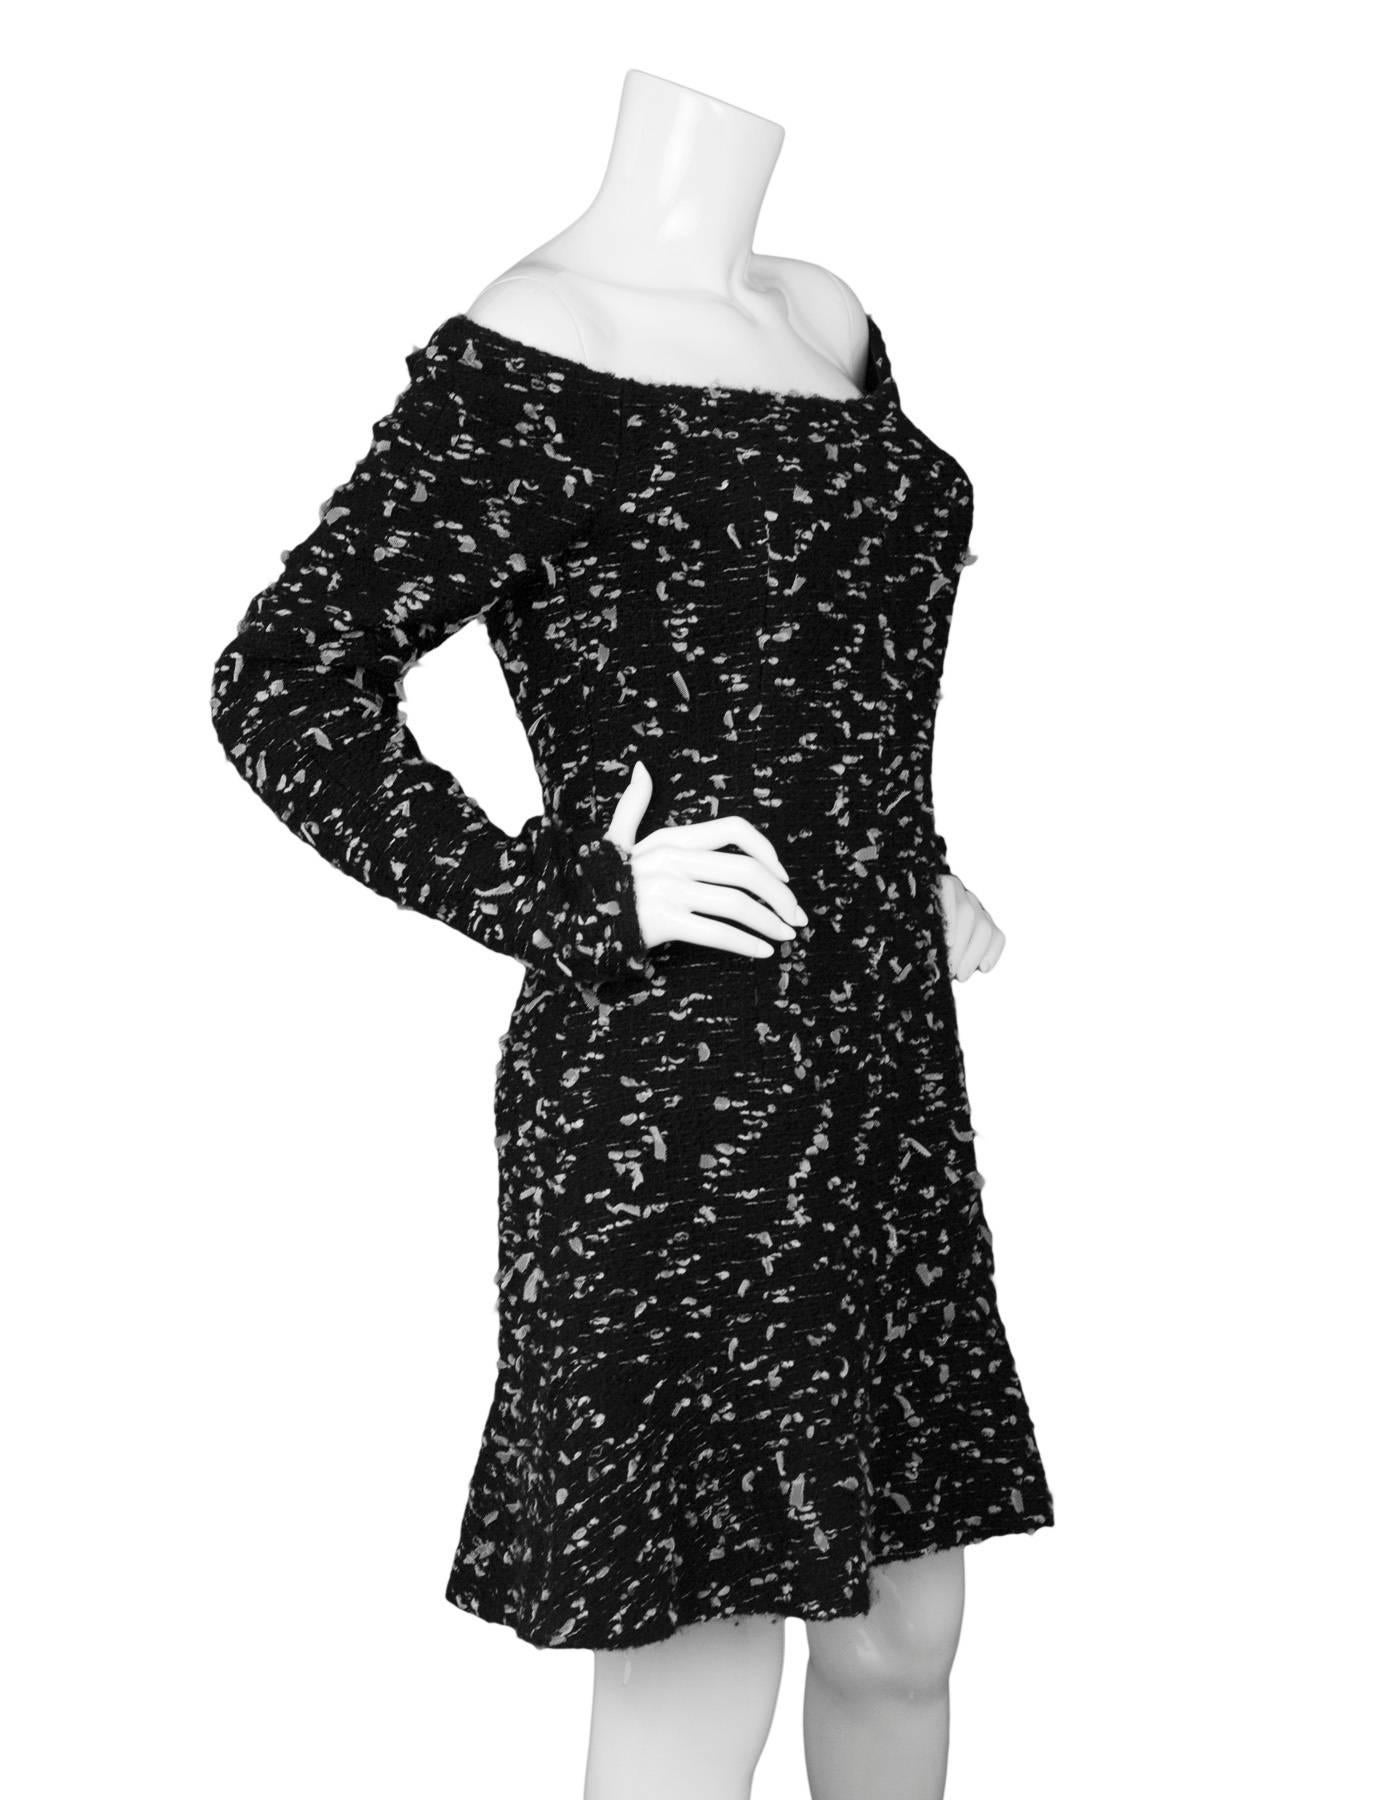 Chanel Confetti Tweed Off the Shoulder Dress

Made In: France
Year of Production: 2002
Color: Black and white
Composition: 72% wool, 8% nylon, 8% acrylic, 7% rayon, 3% polyethylene, 2% polyester
Lining: 90% silk, 10% spandex
Closure/Opening: